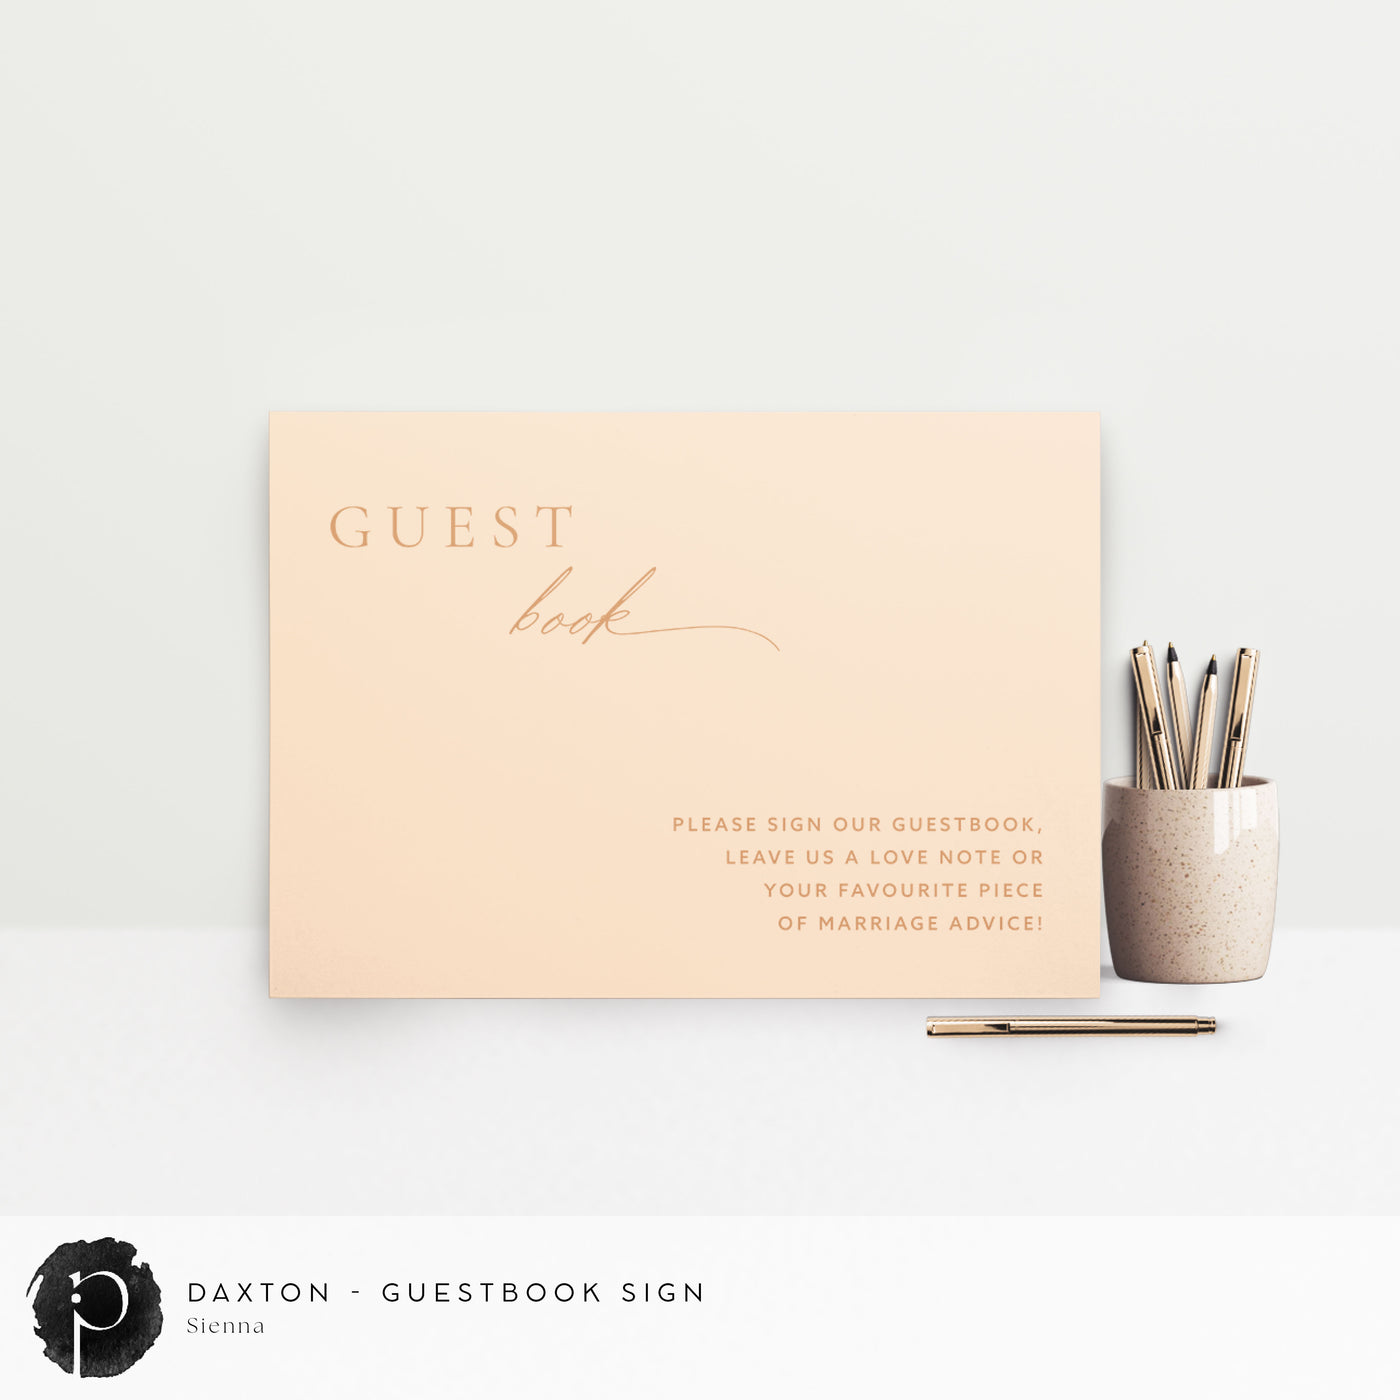 Daxton - Guestbook Sign